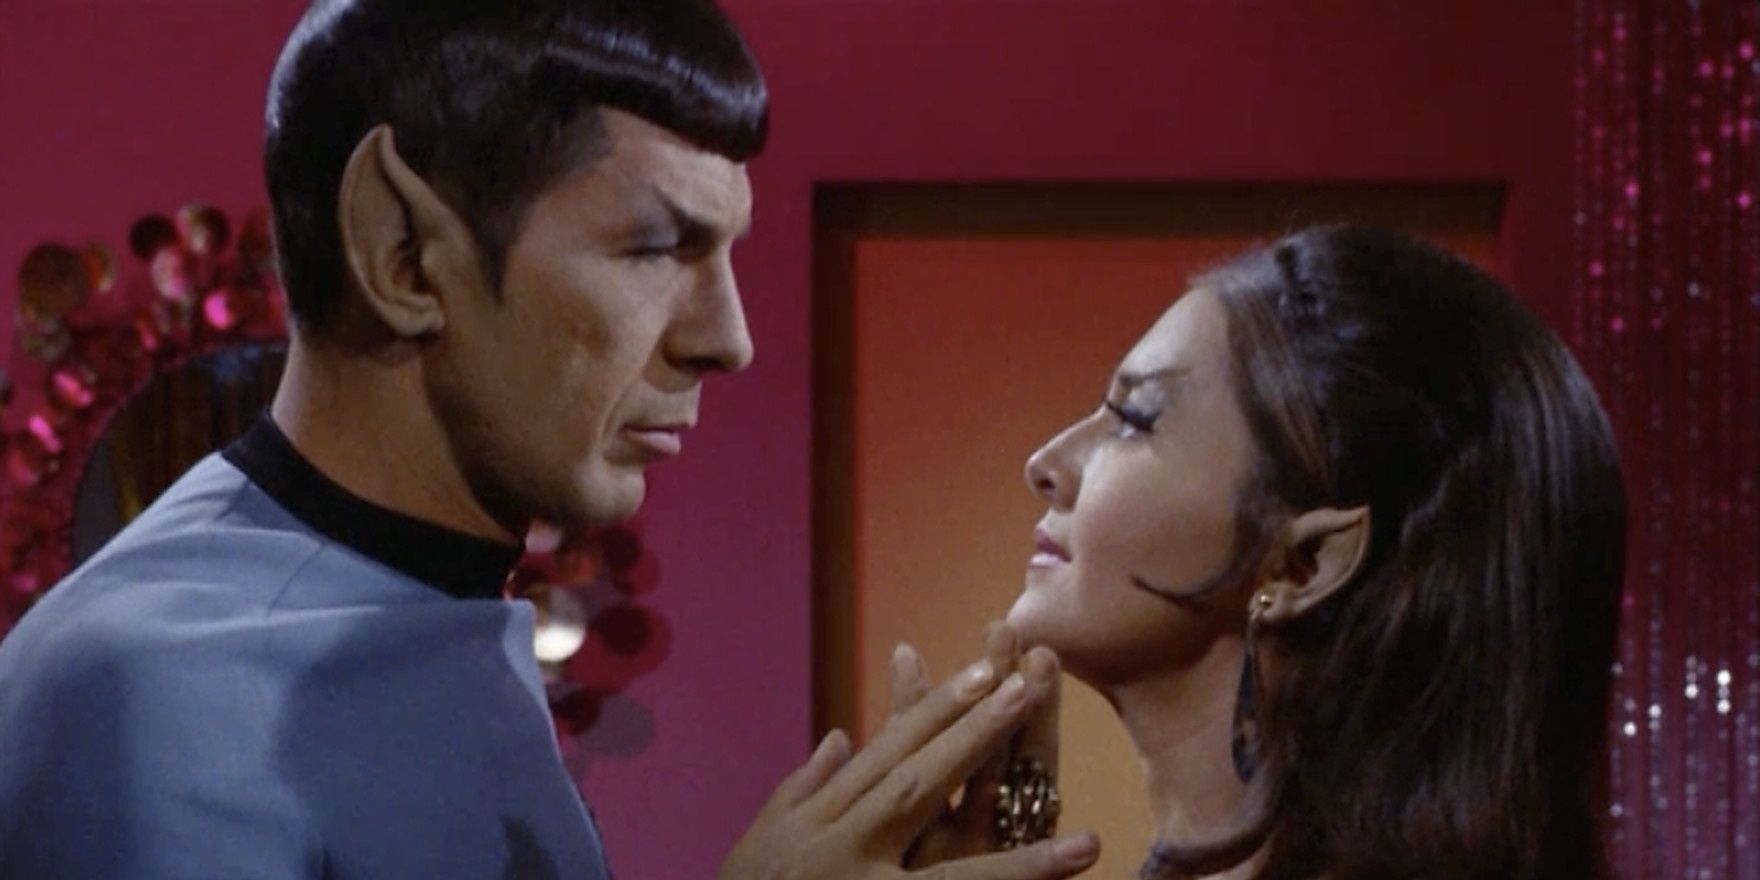 Spock and the Romulan commander touch hands in Star Trek TOS